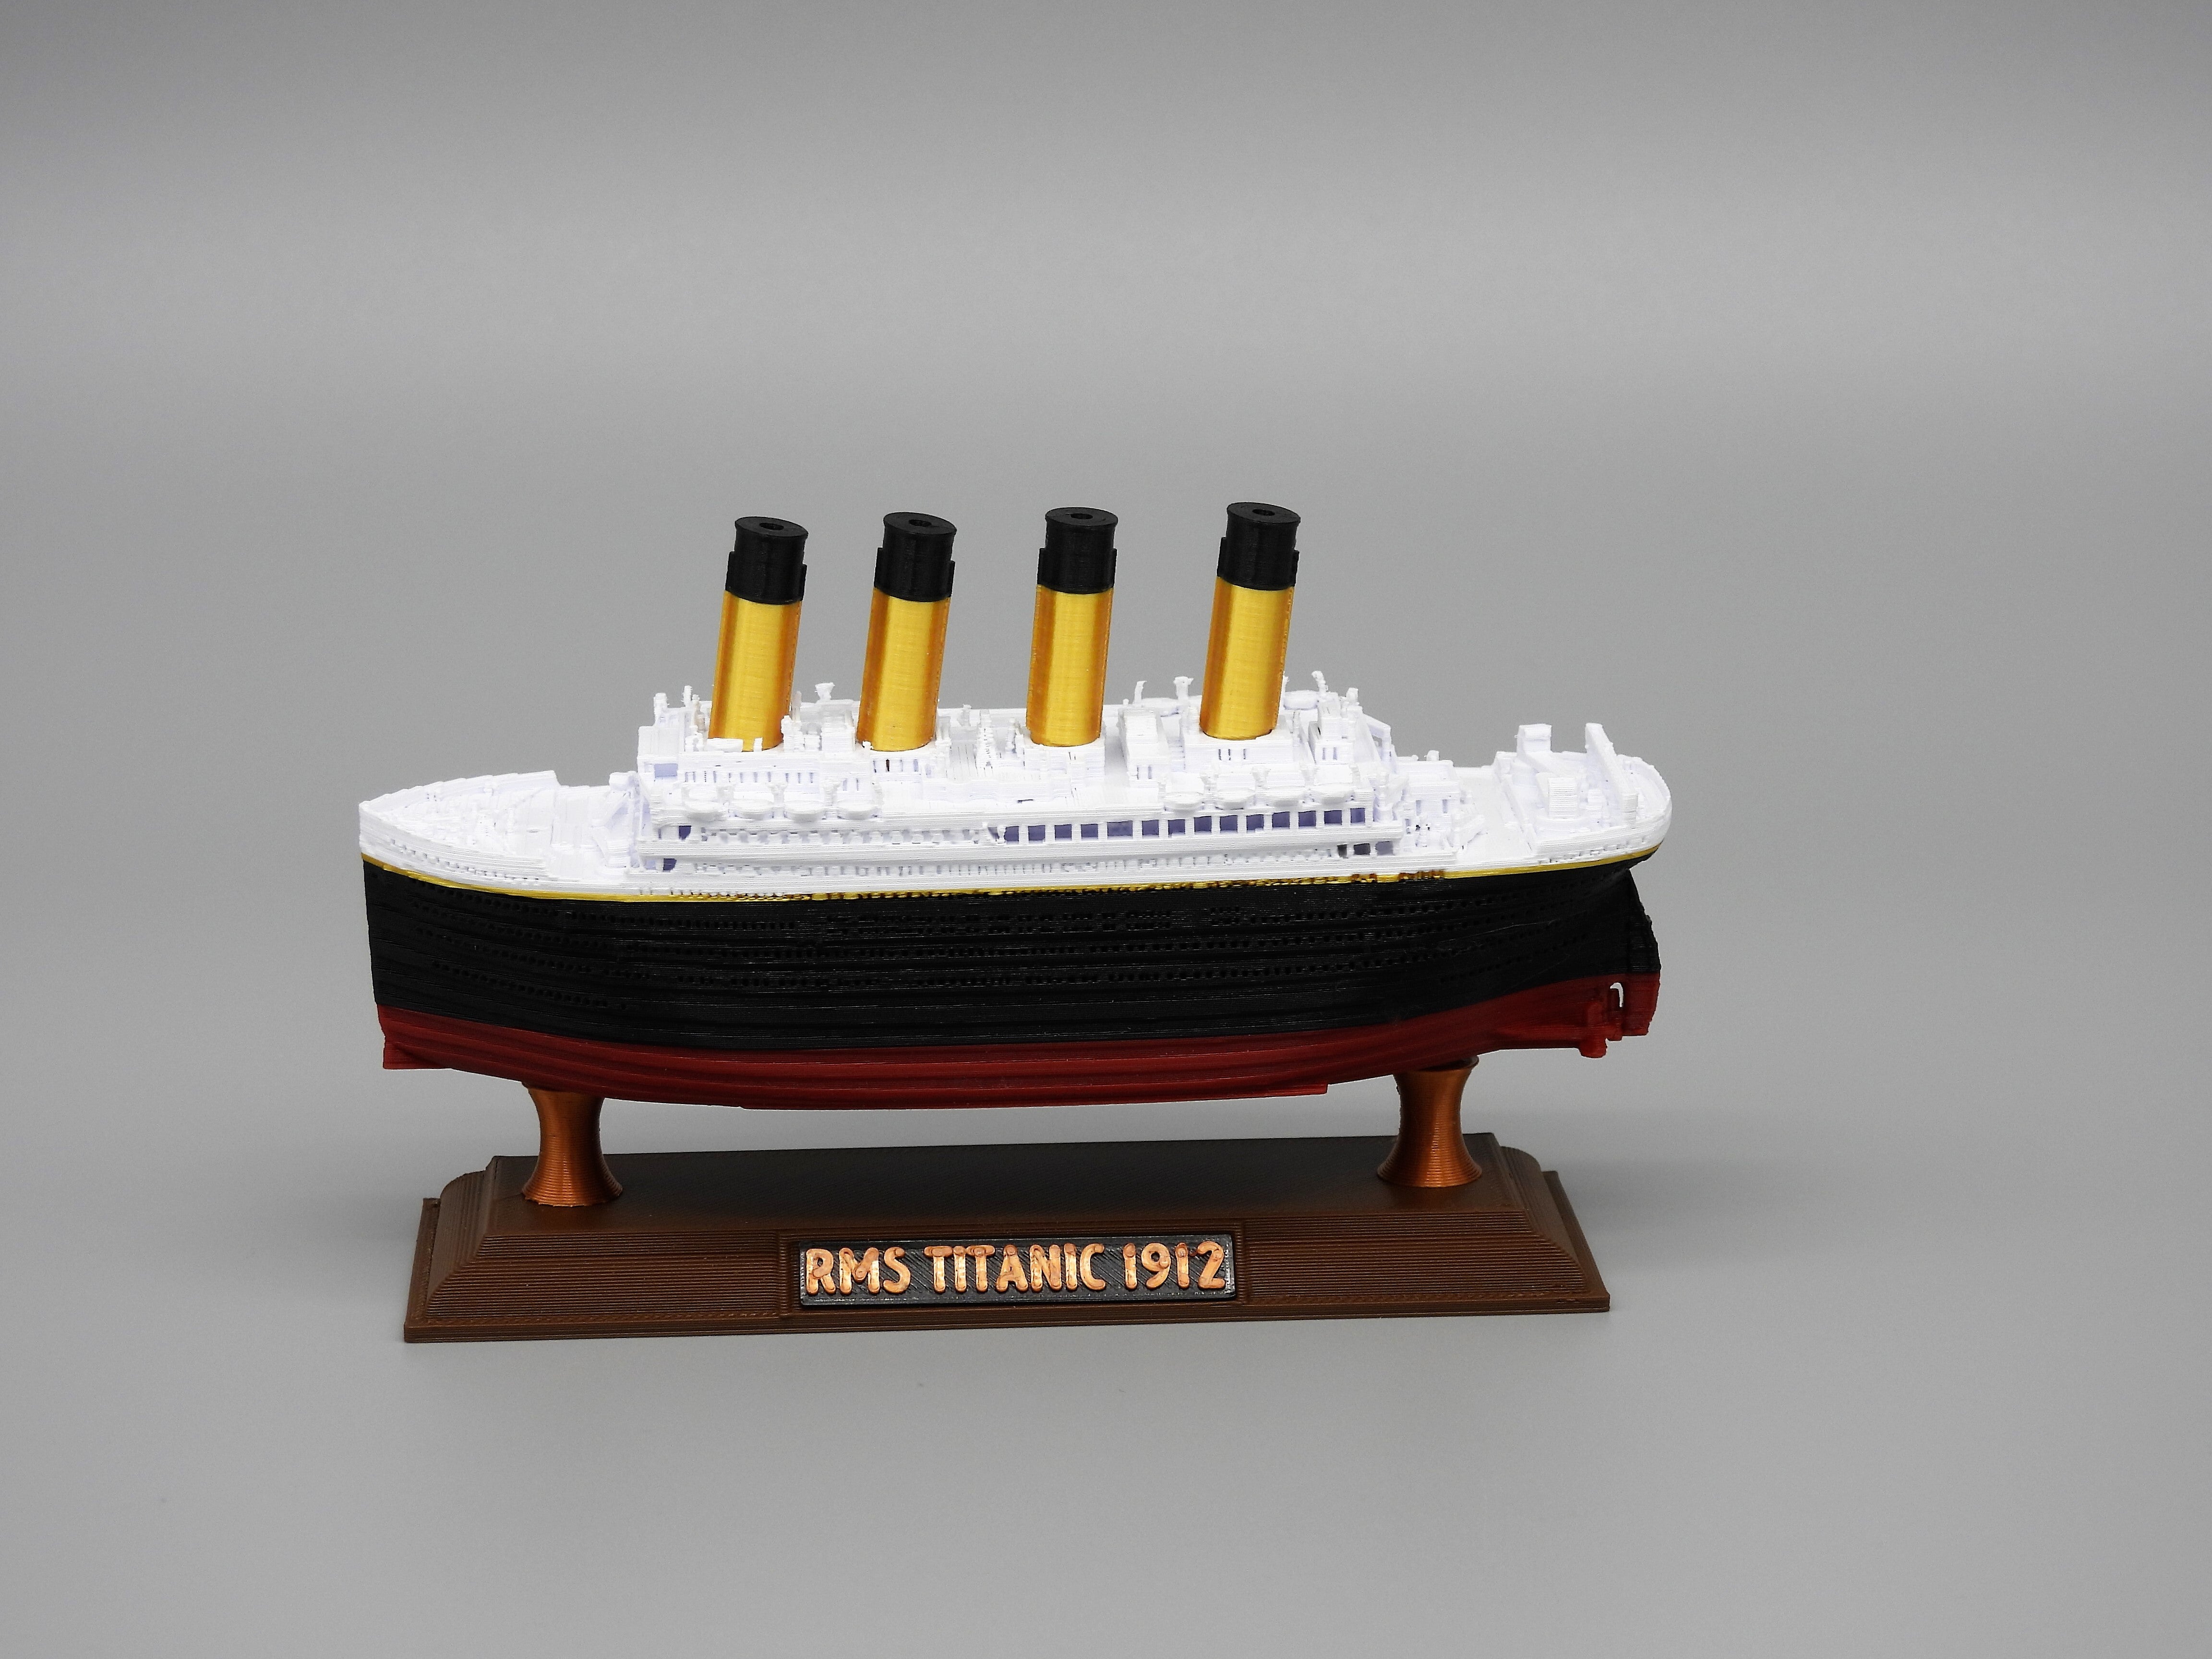 Floats　Floating　Kid　Perfect!　Model　Bathtub　Tested　RMS　TheRoller3D　TITANIC　Approved!